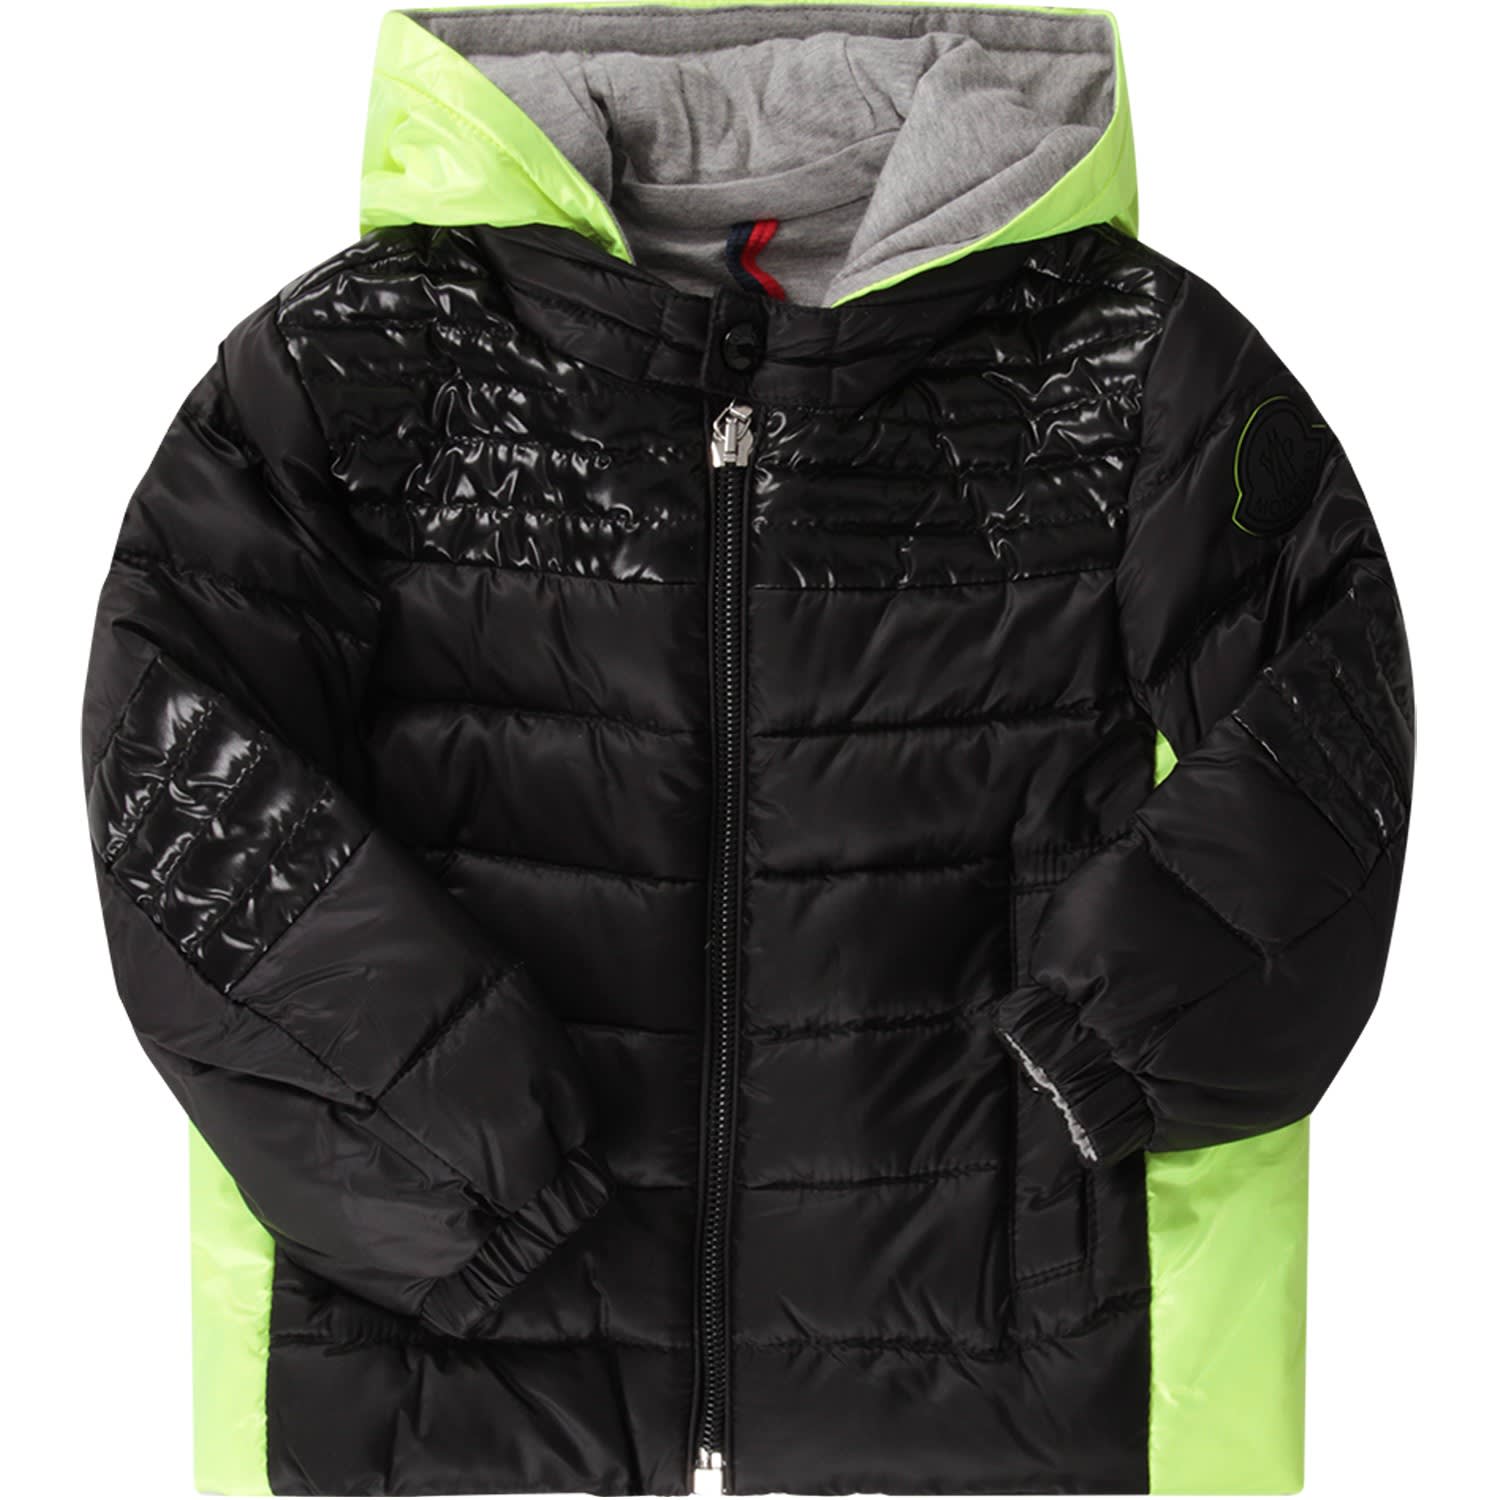 MONCLER BLACK AND NEON YELLOW BABYBOY JACKET WITH ICONIC PATCH,11223624